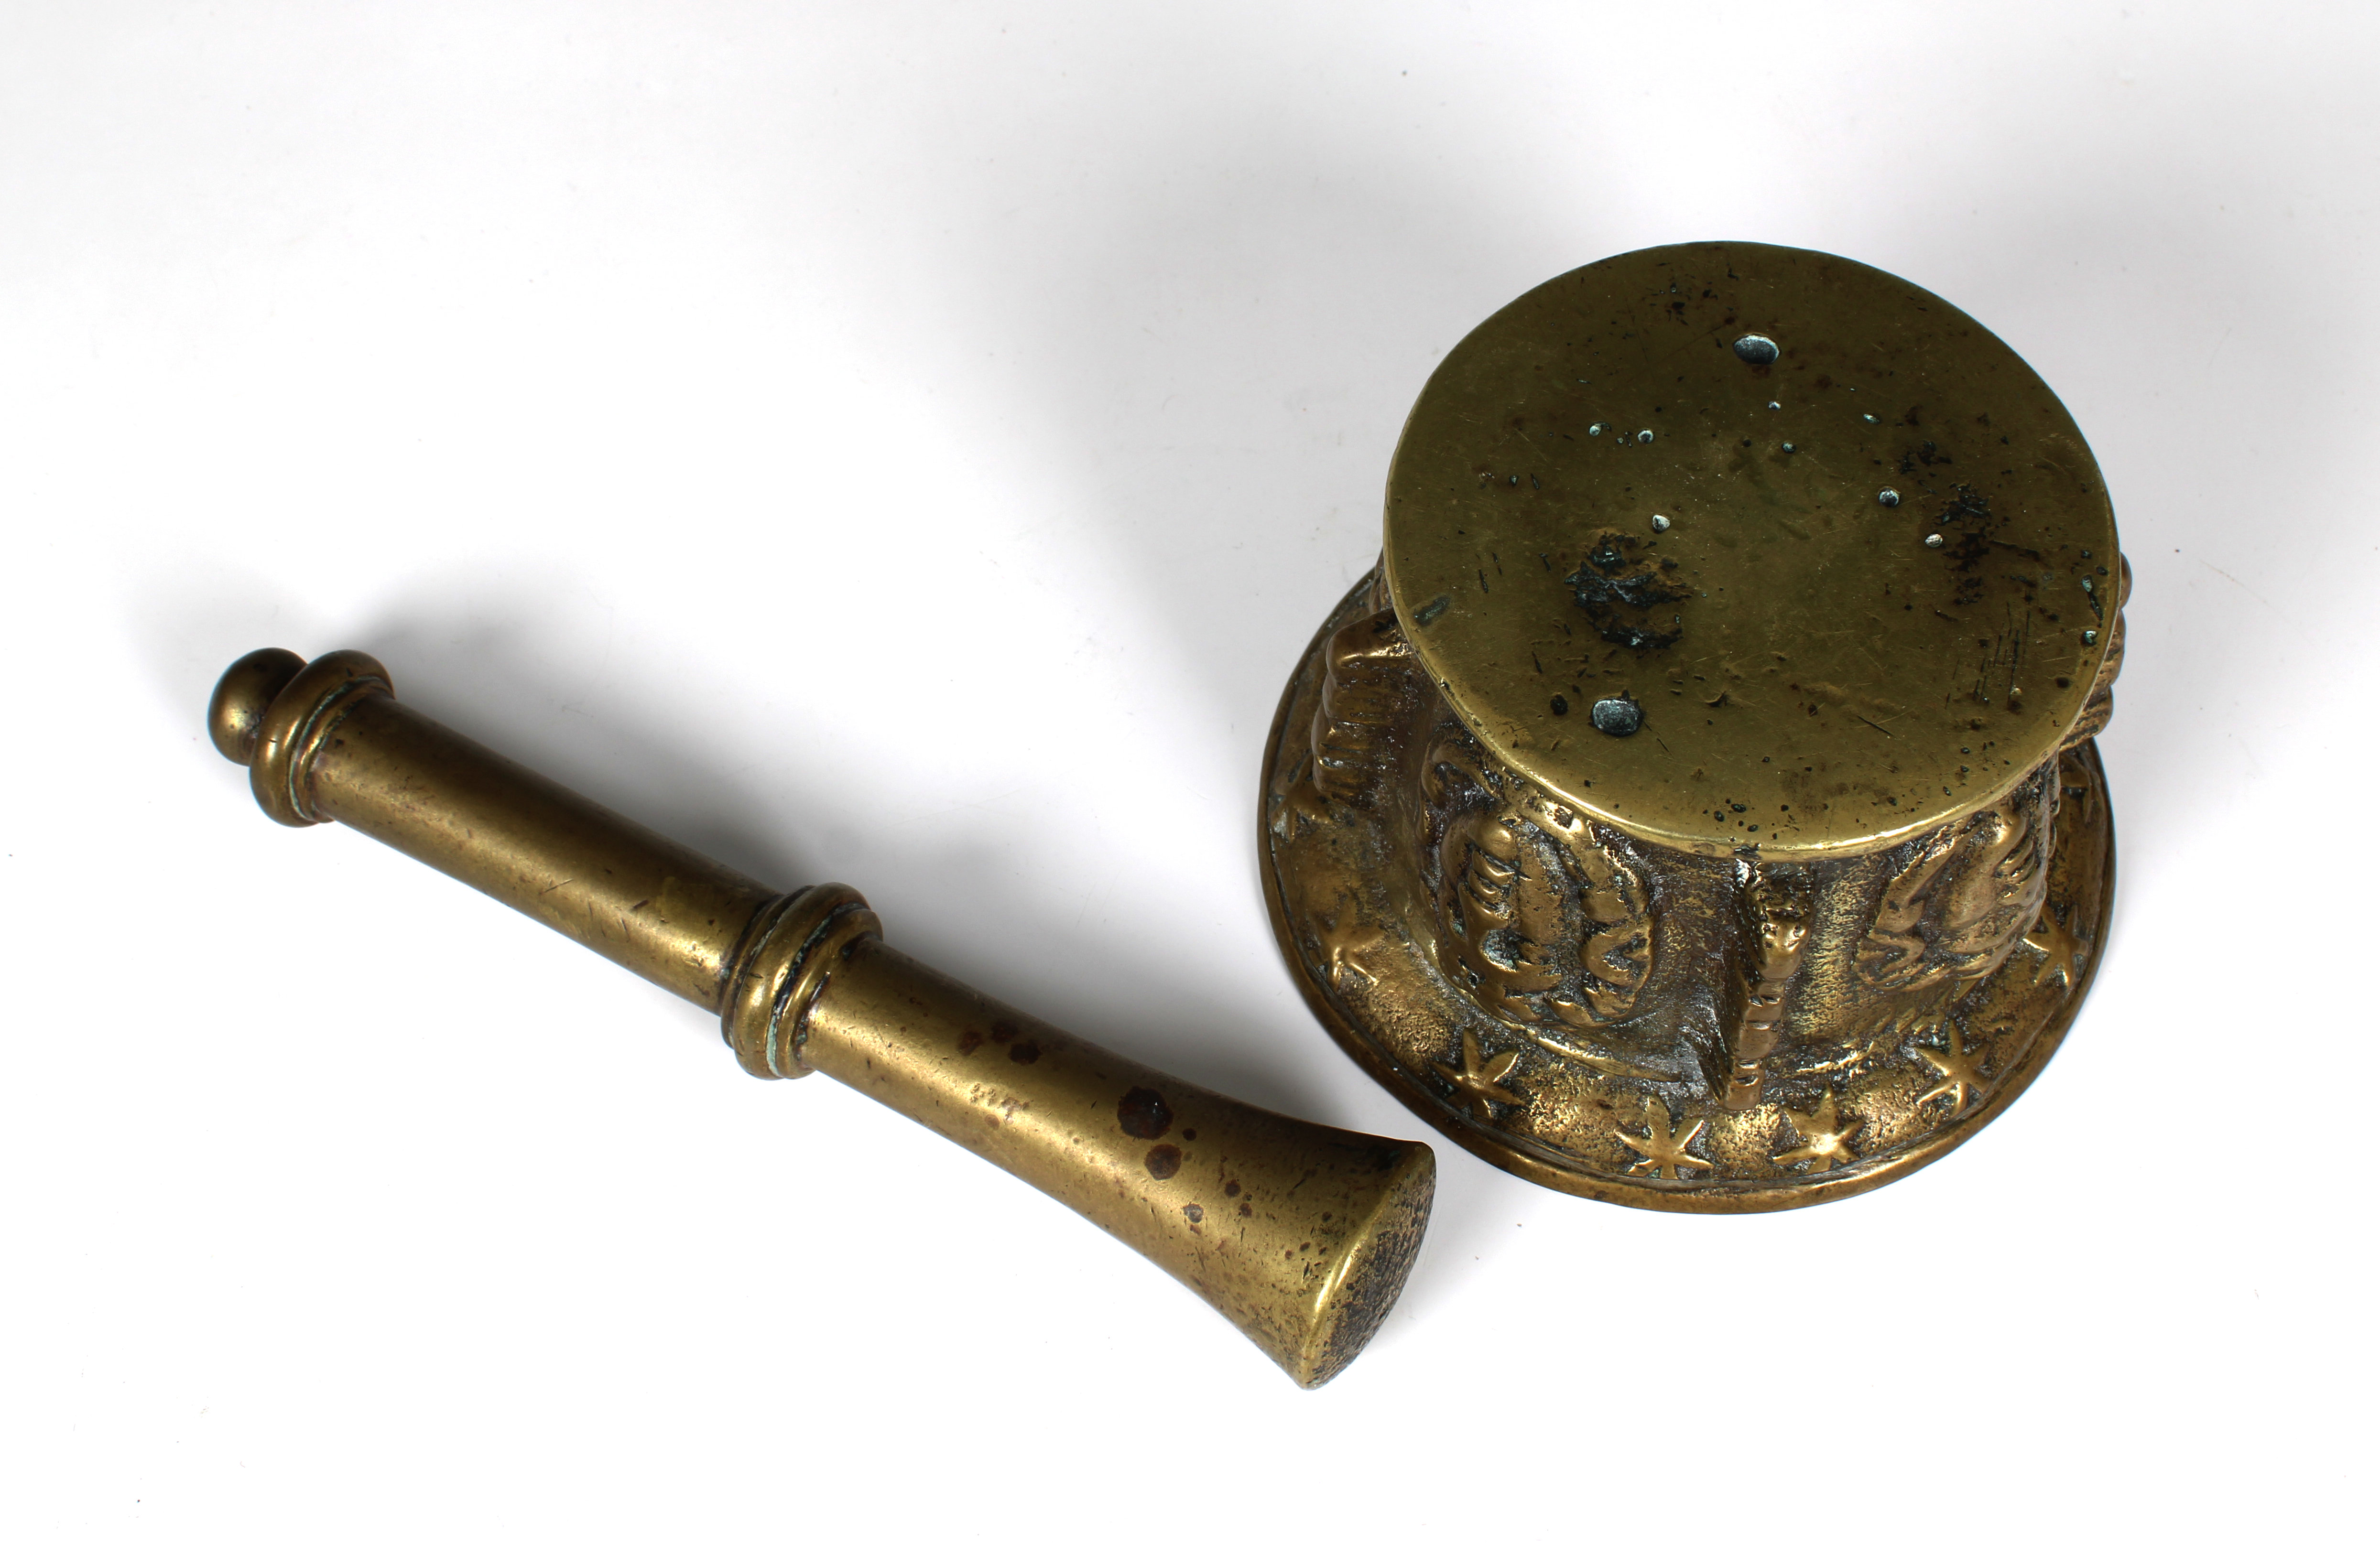 A 17th century figural brass apothecary pestle and mortar - Image 3 of 3